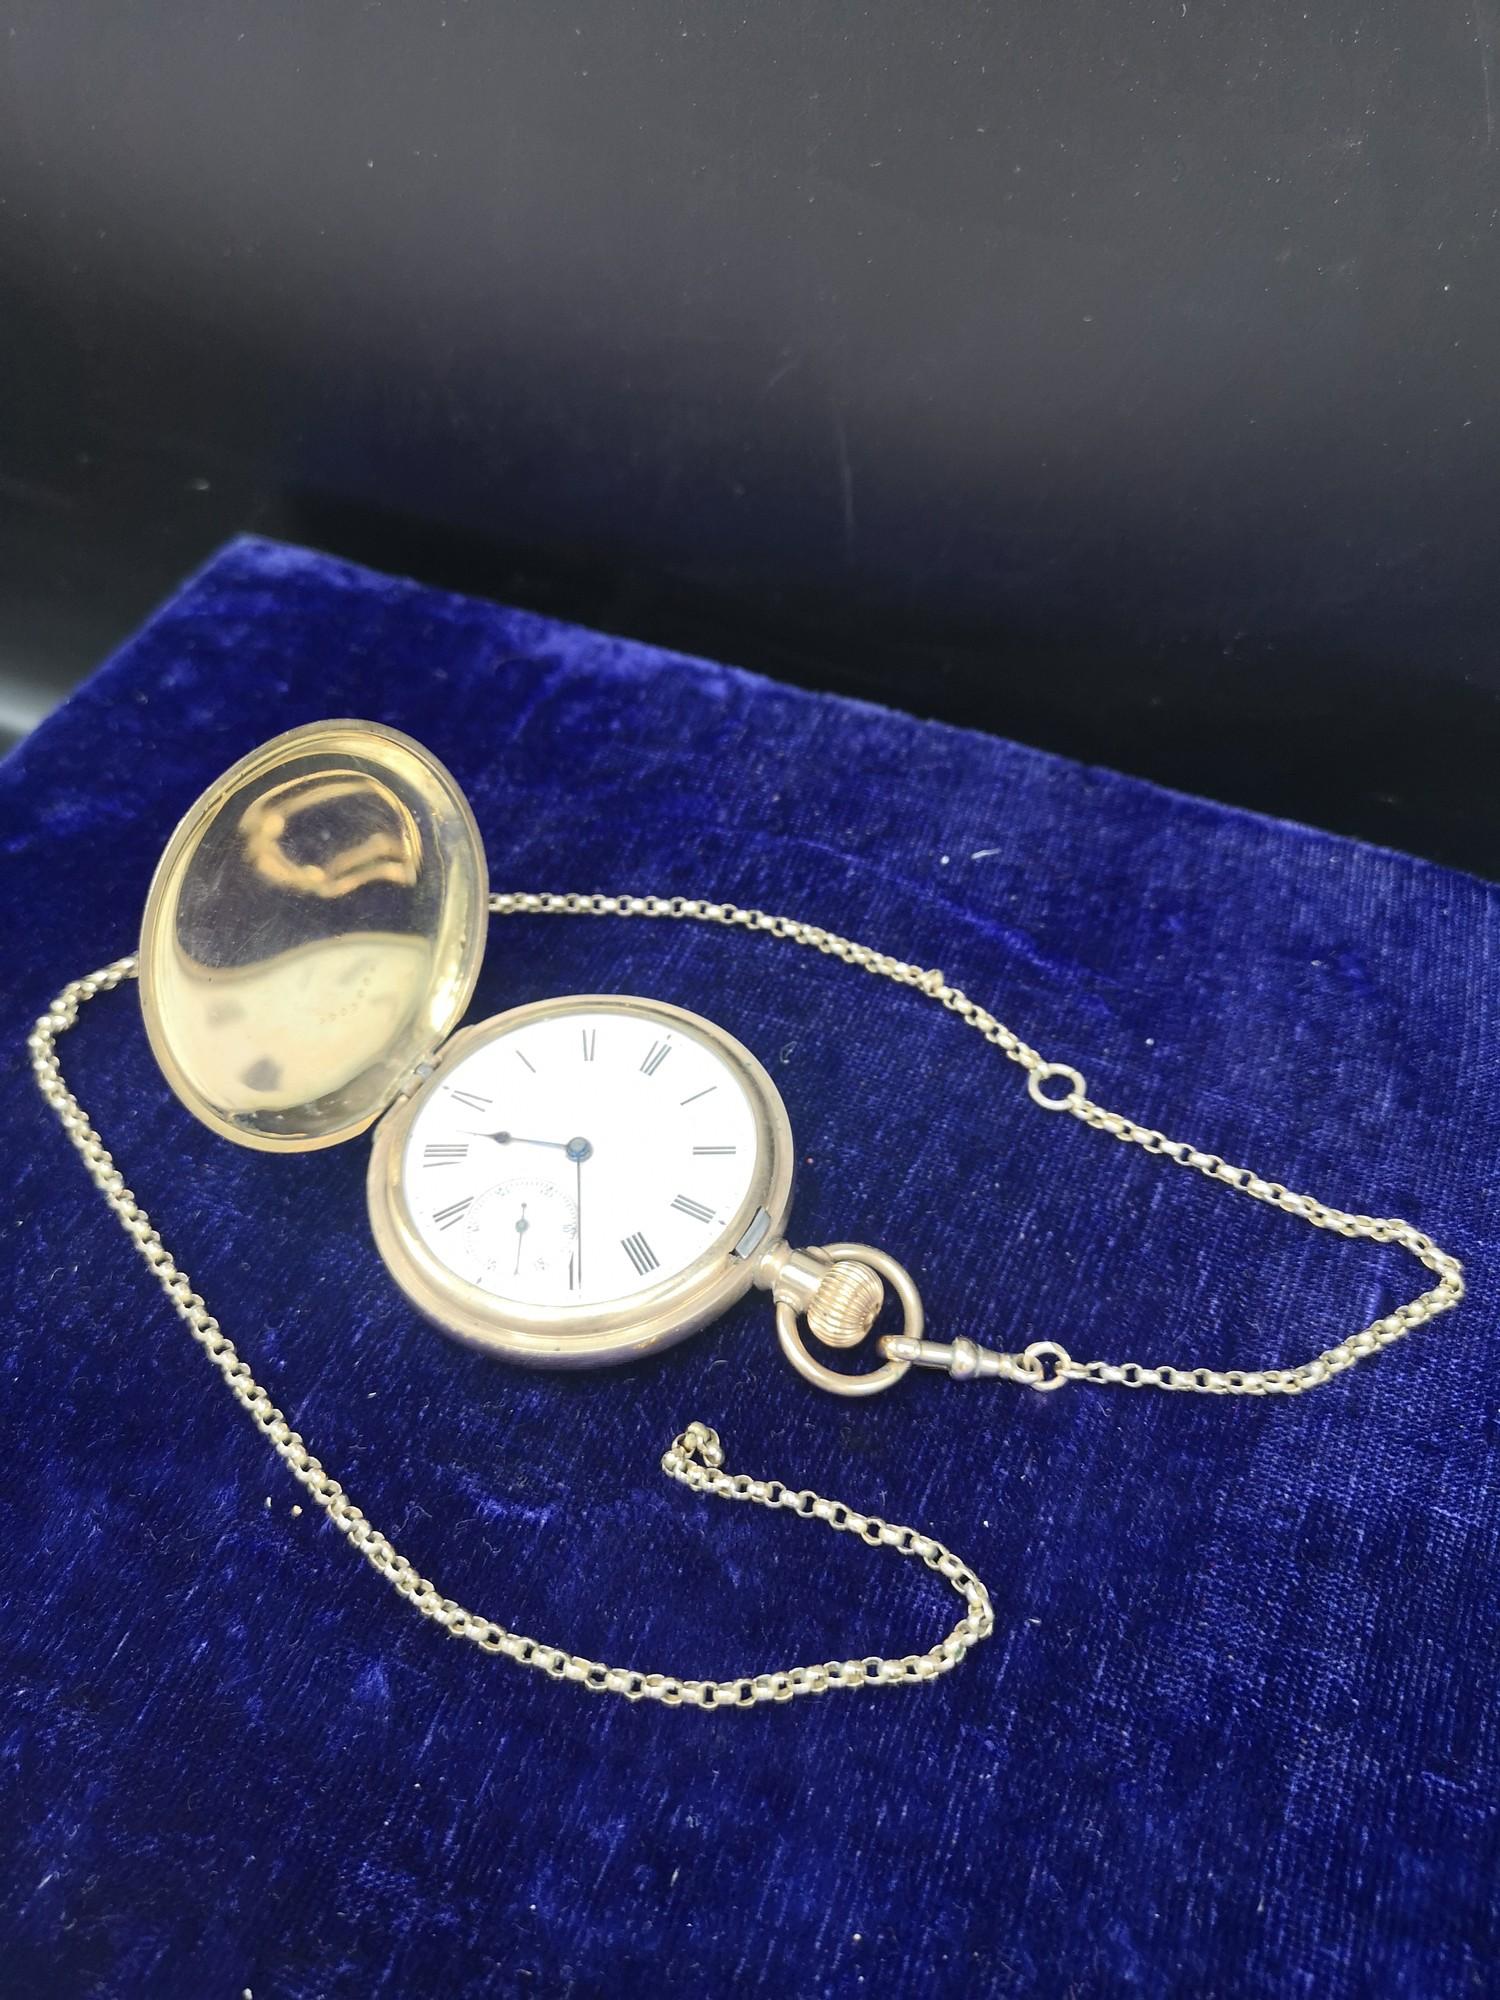 Keystone USA gold plated pocket watch with possibly gold Albert chain in working order. - Image 3 of 3